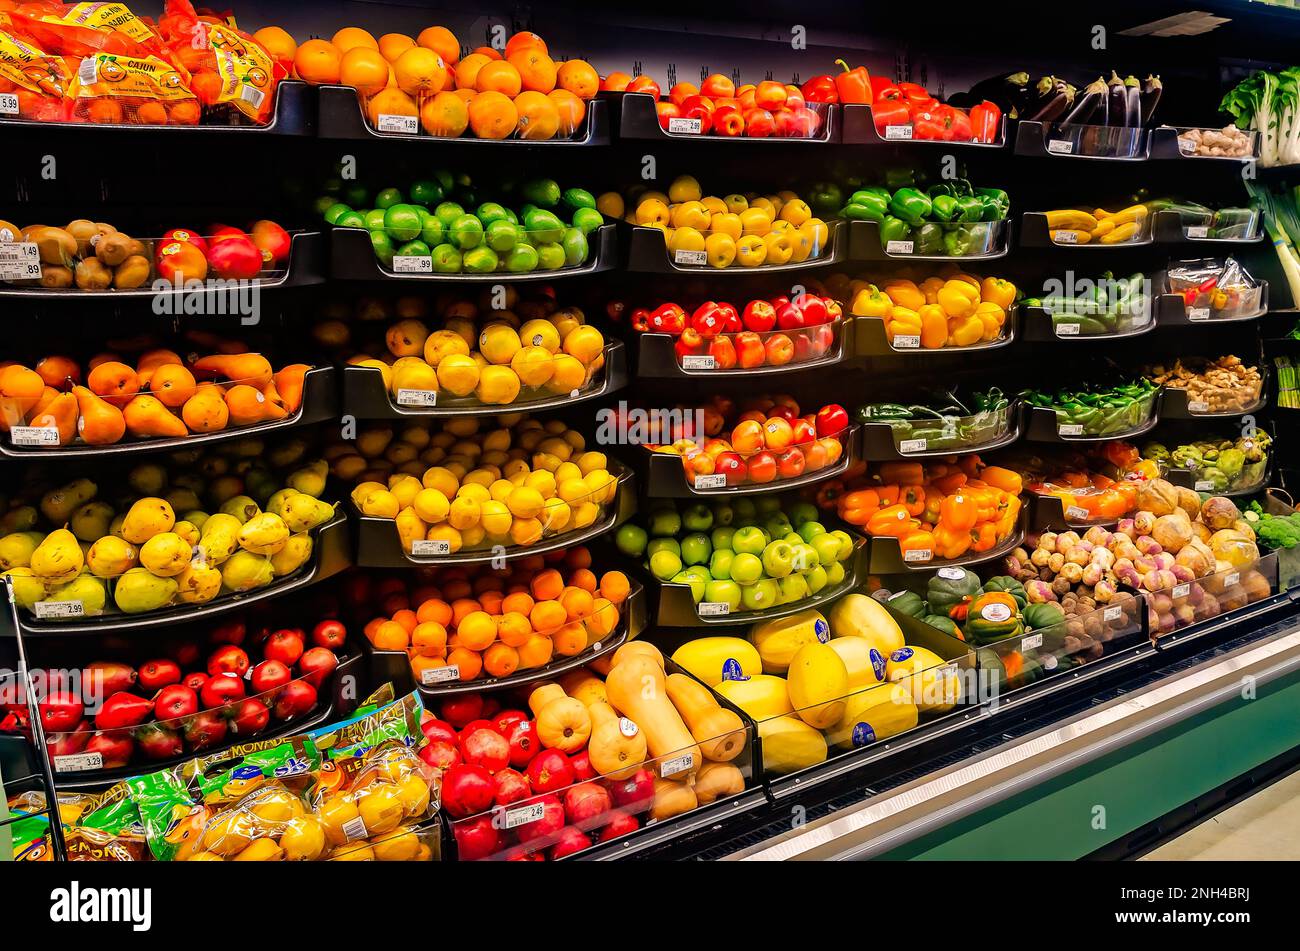 Orlando,FL/USA -10/8/19: The fresh produce aisle of a grocery store with  colorful fresh fruits and vegetables ready to be purchased by consumers  Stock Photo - Alamy